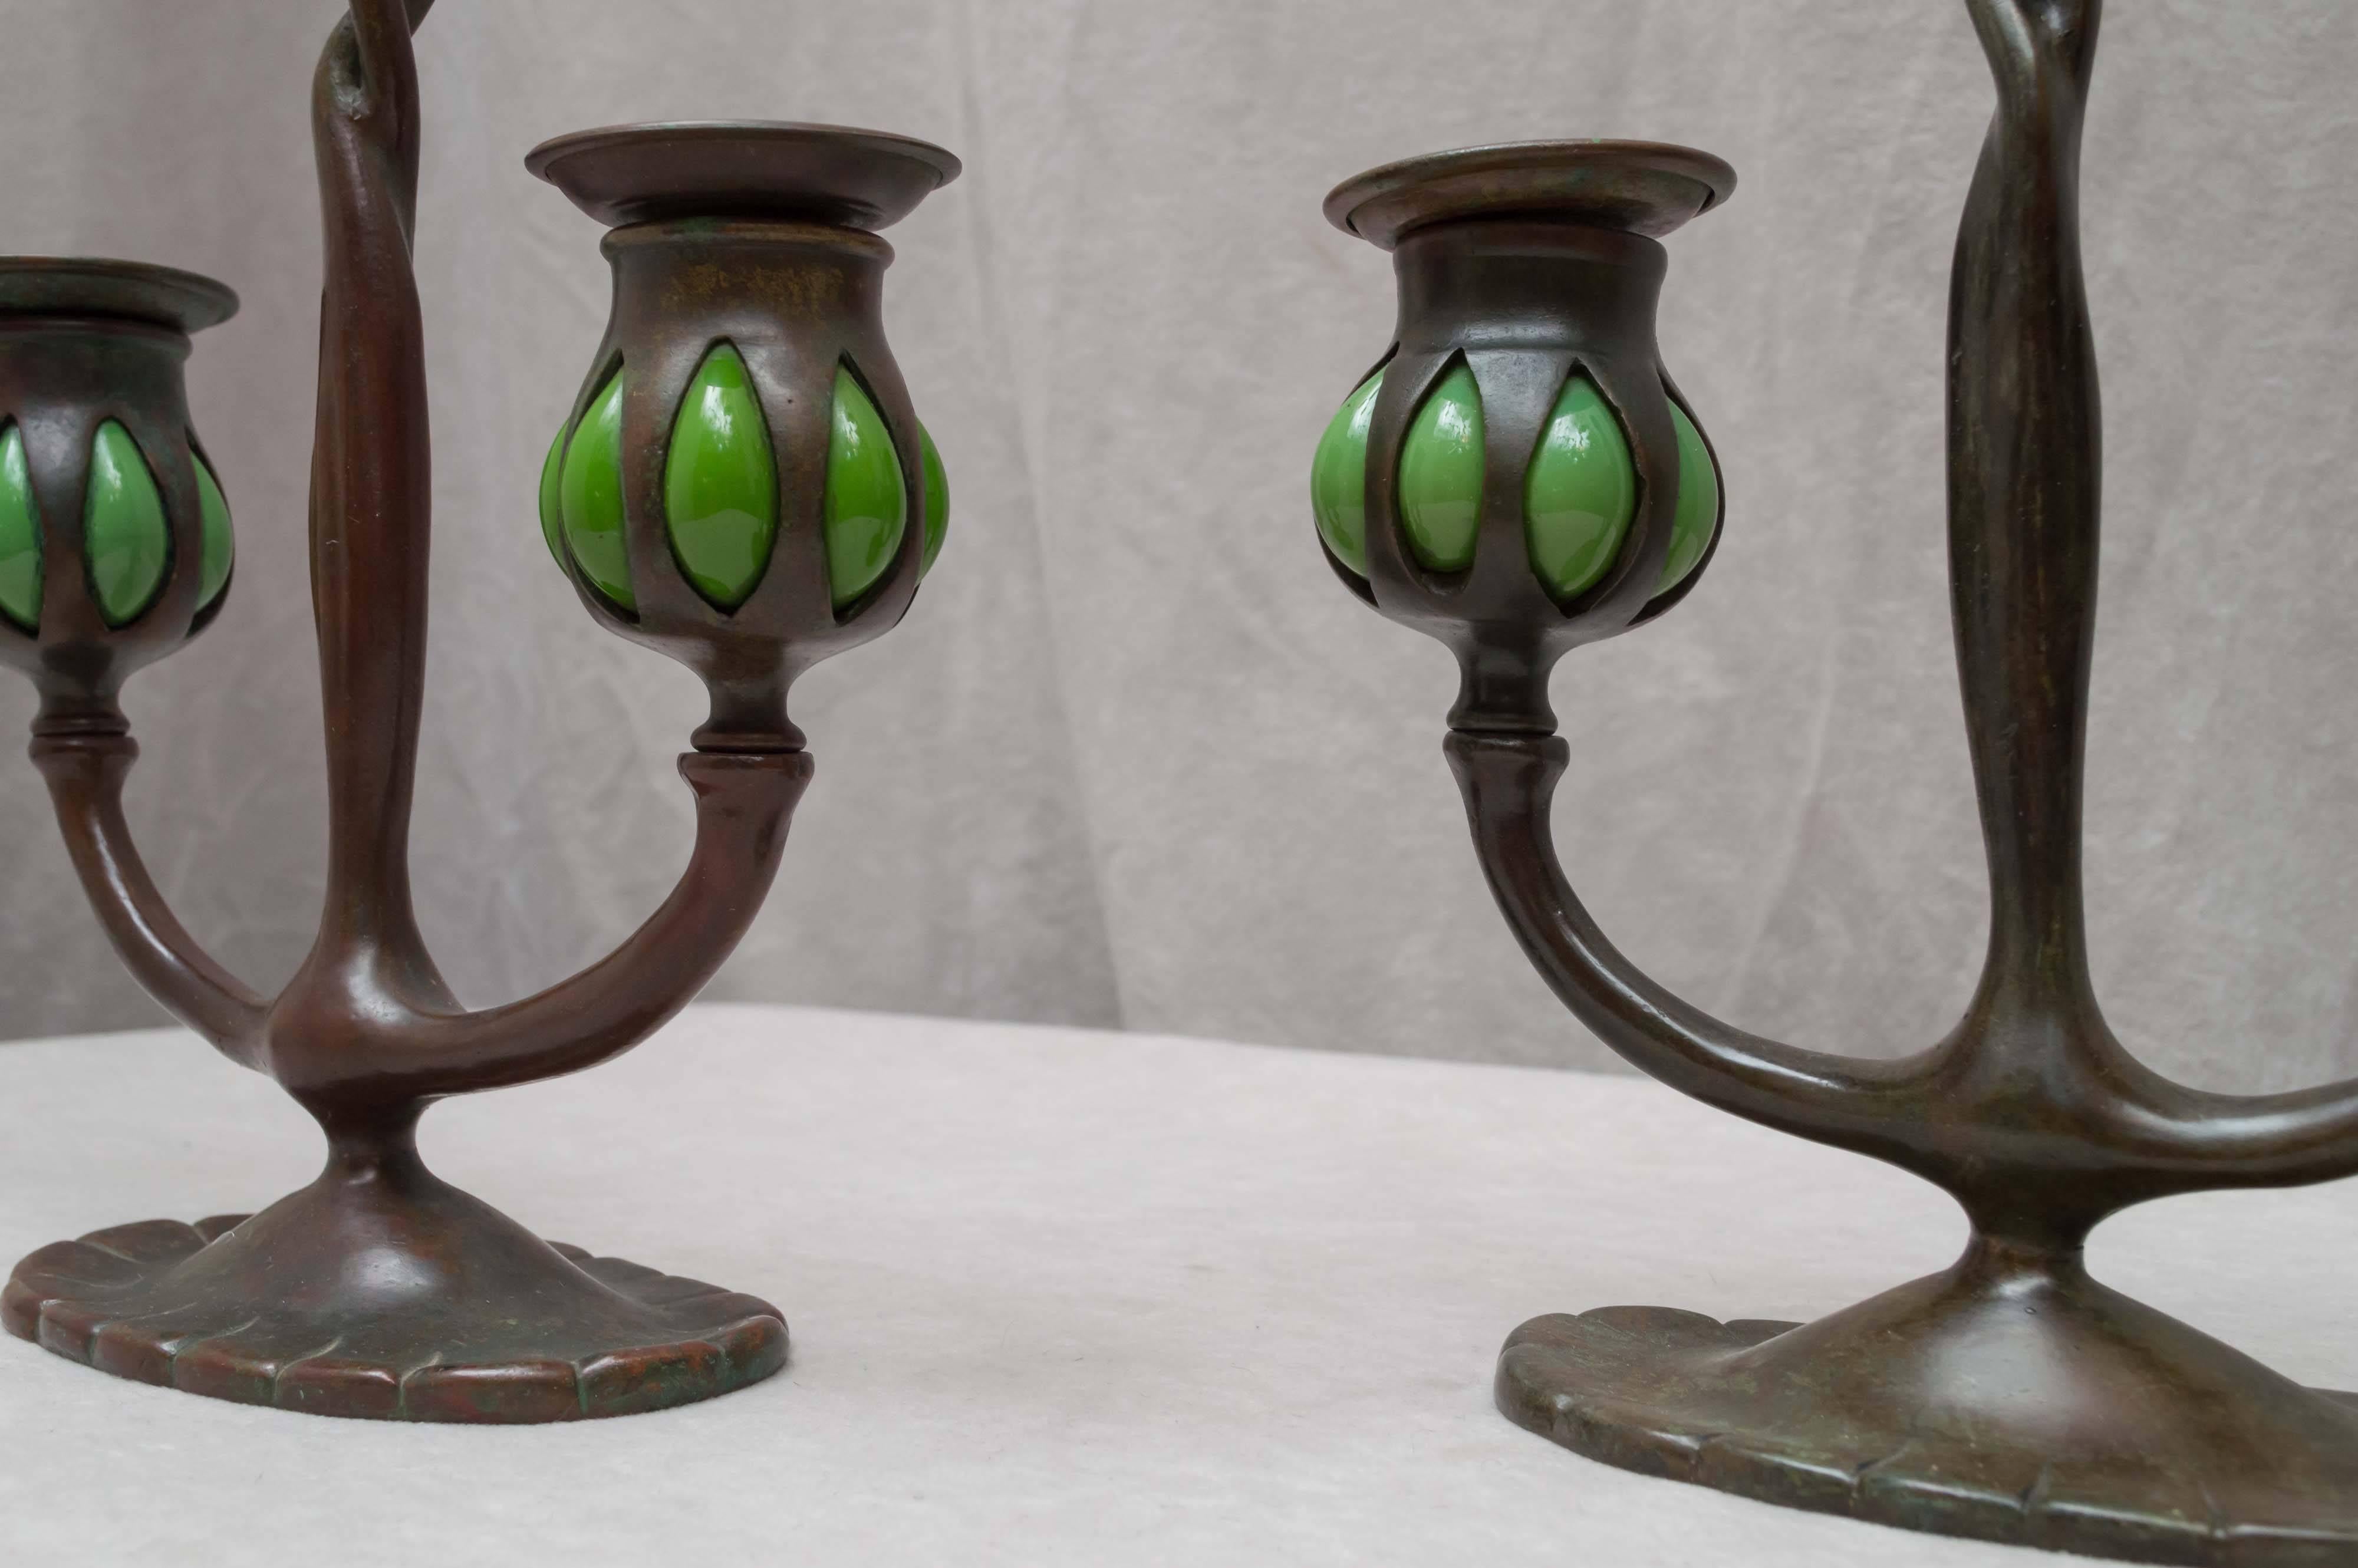 Hand-Crafted Pair of Signed Tiffany Studios Double Arm Candlesticks